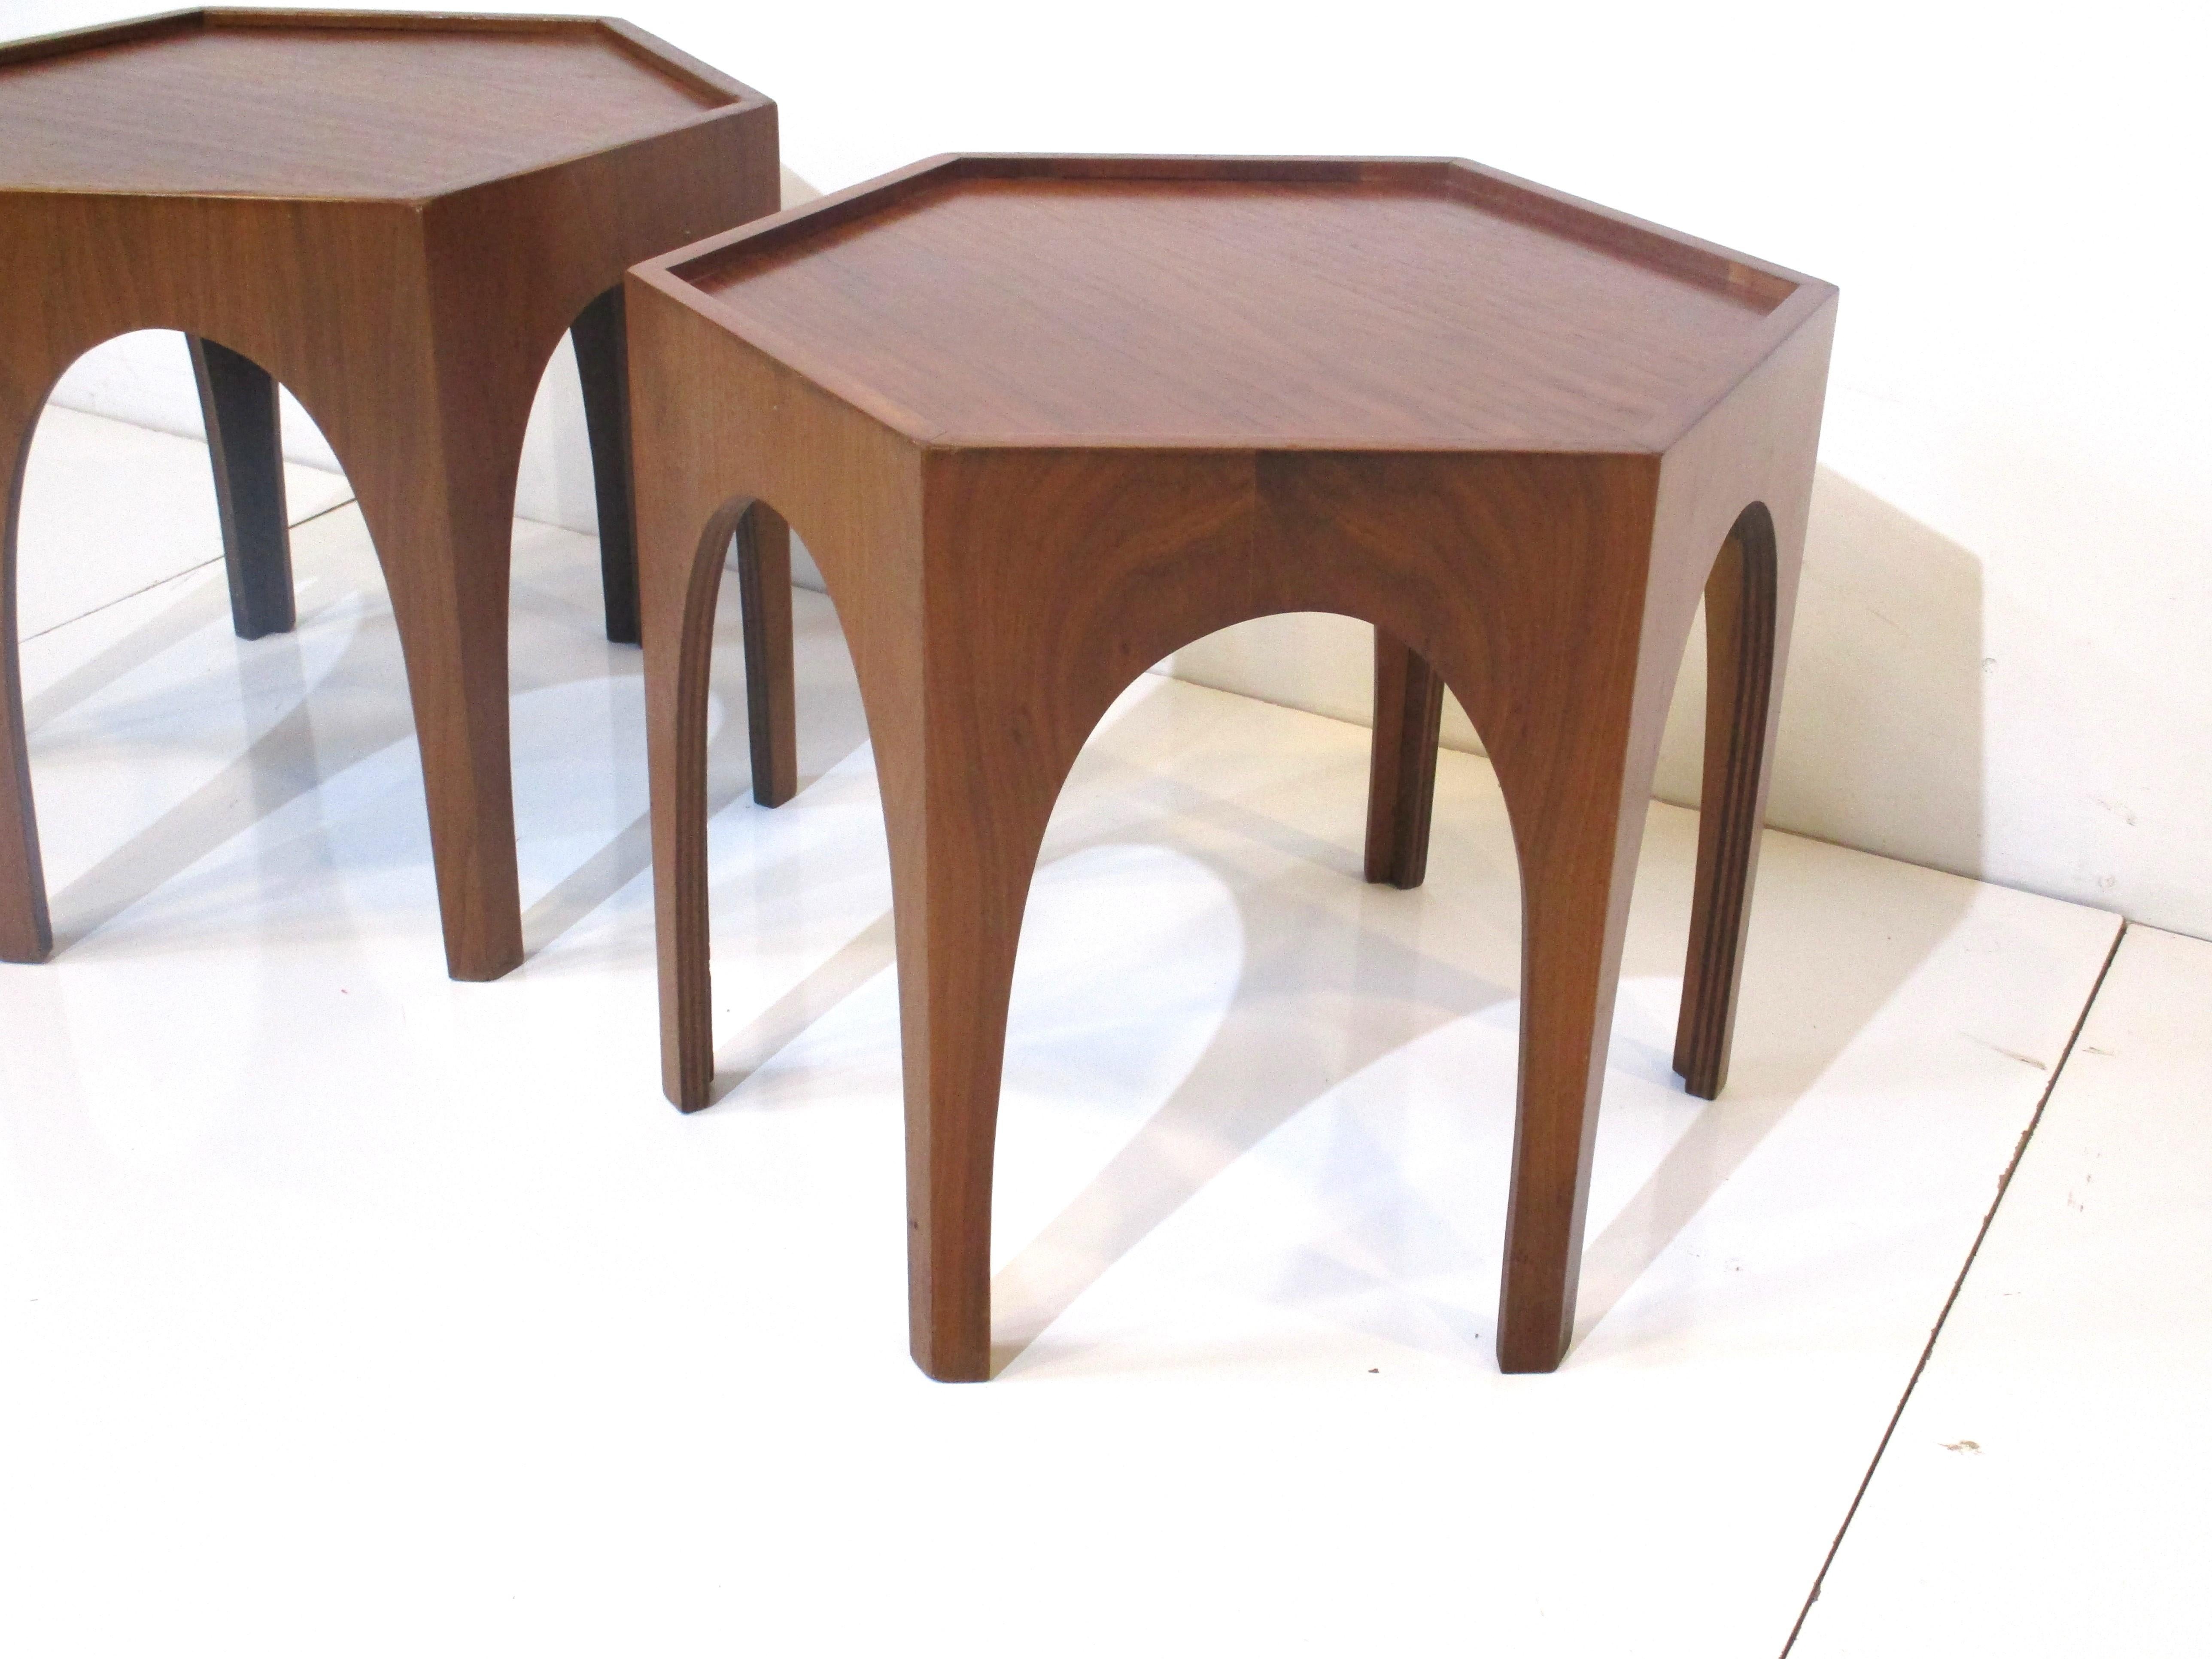 A matching pair of hexagon walnut side tables with tapered legs and slightly raised lip around the edges . Well crafted in the manner of Heritage Furniture company with great graining and color.